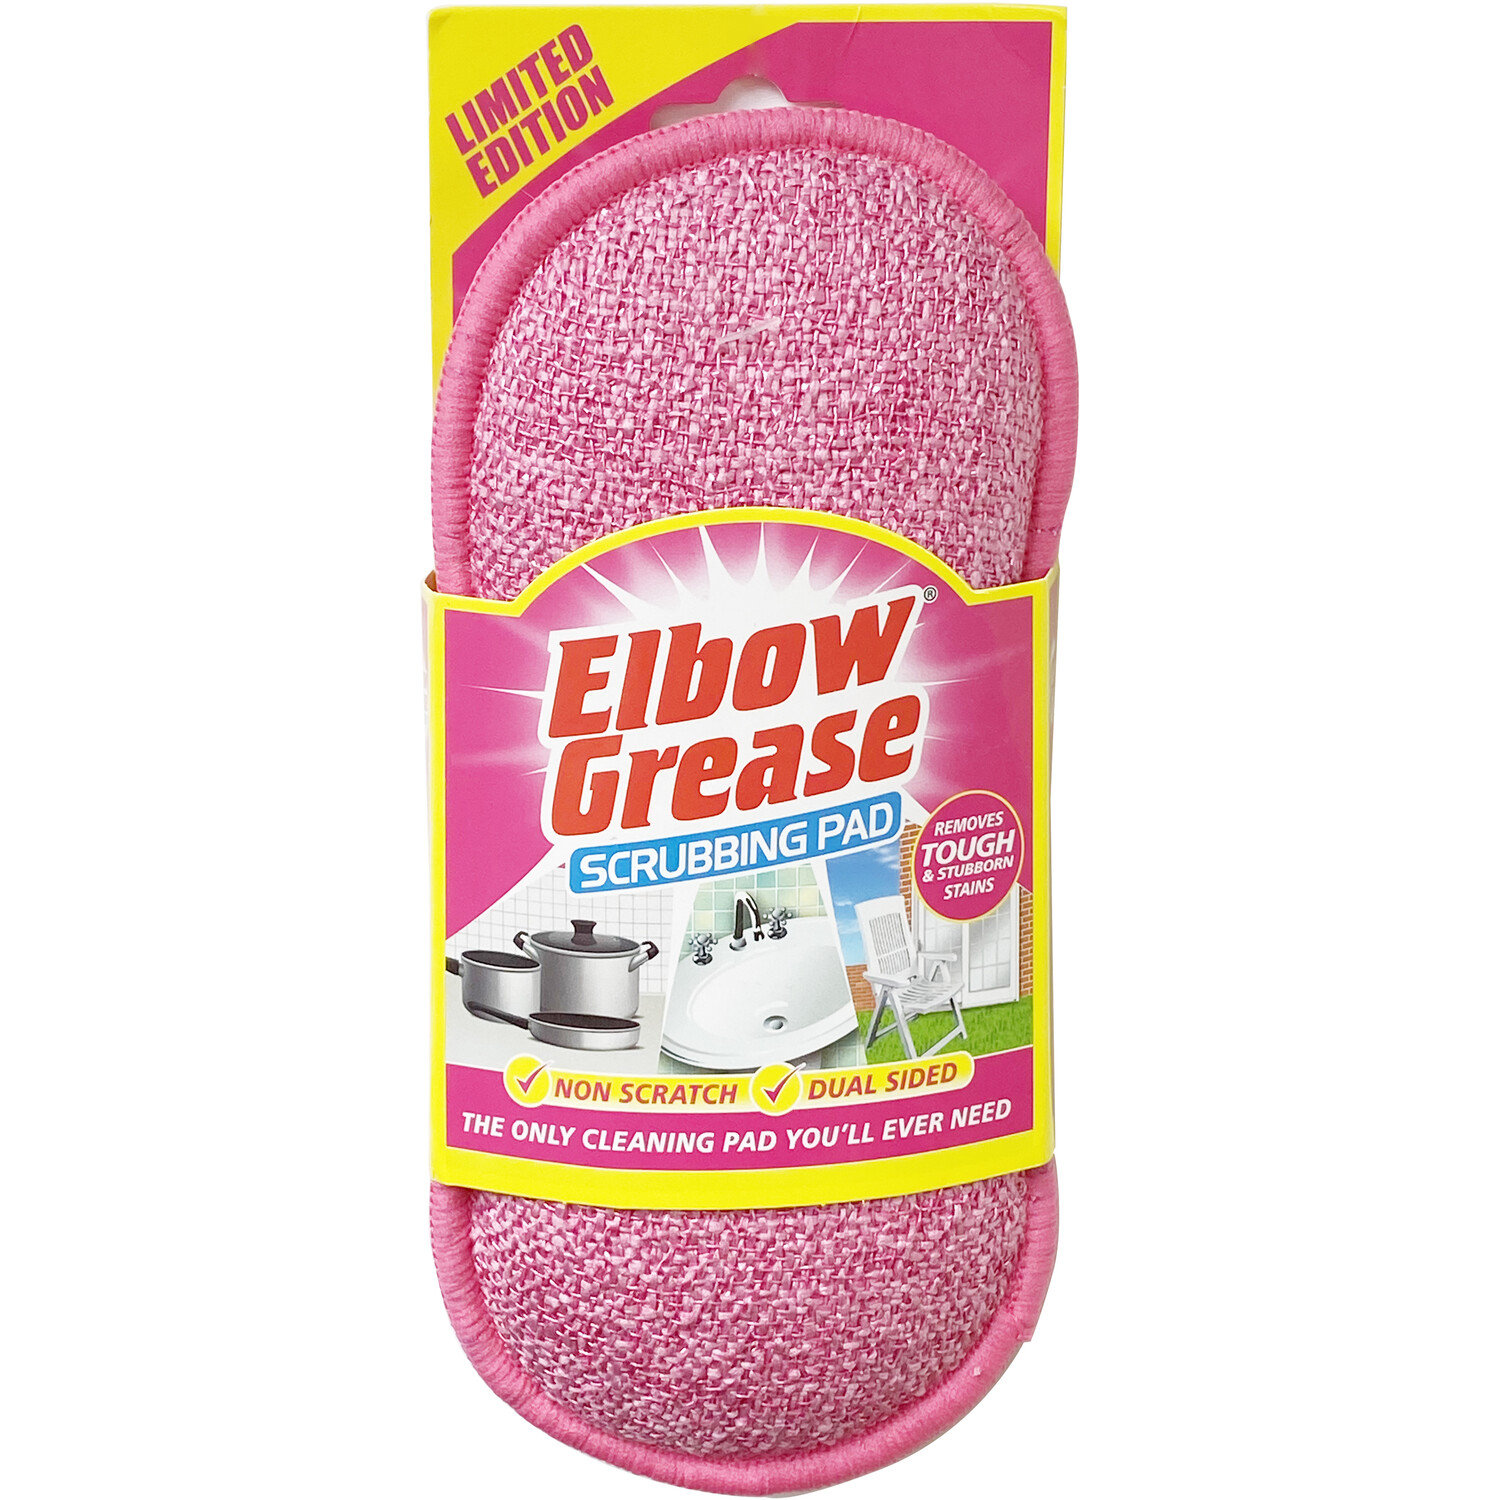 Elbow Grease Scrubbing Pad - Pink Image